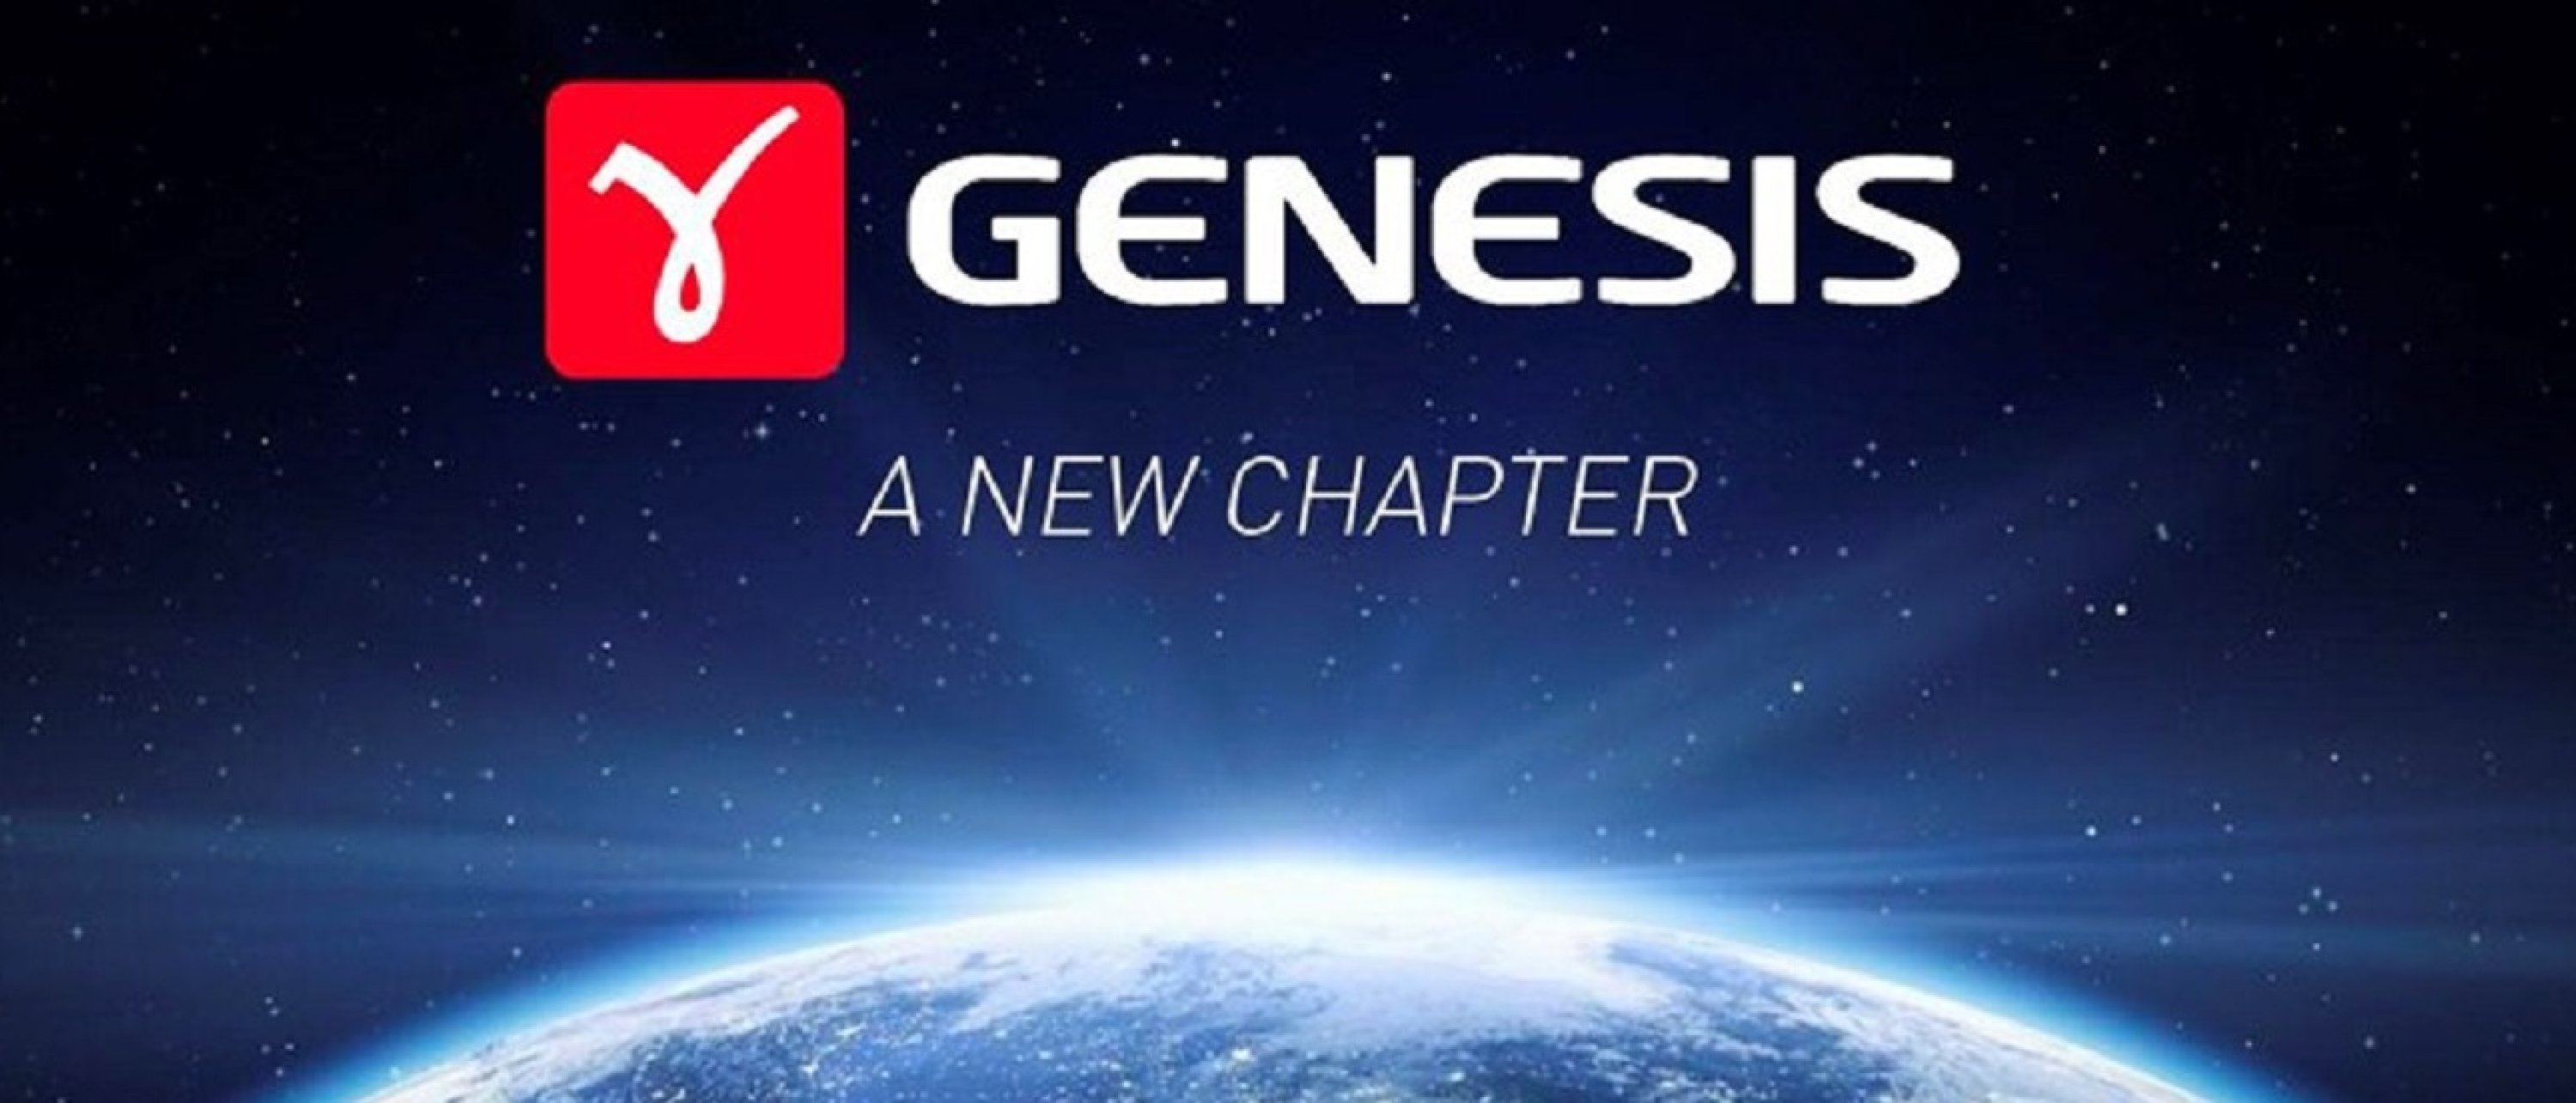 Genesis a new chapter_1440x552